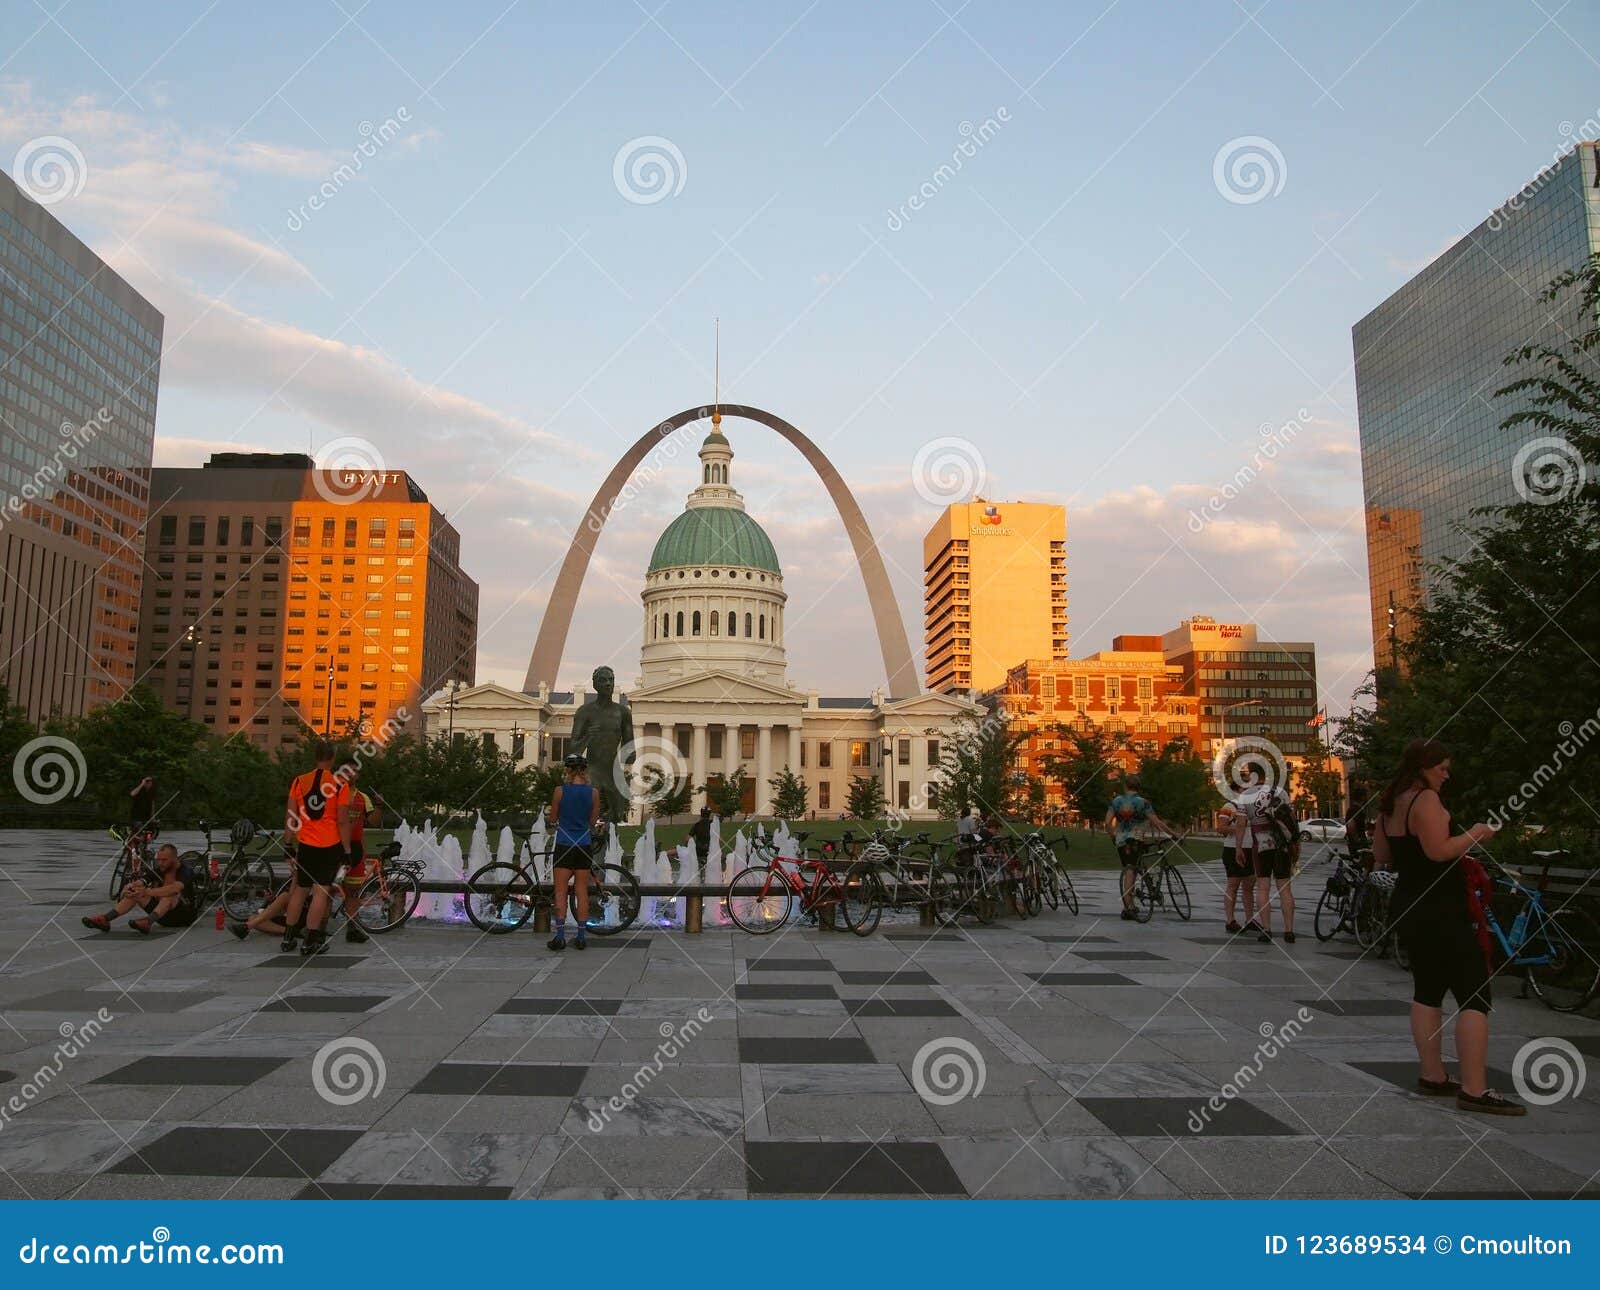 Bicycle Meet Up In St. Louis Editorial Stock Image - Image of destination, bicycling: 123689534